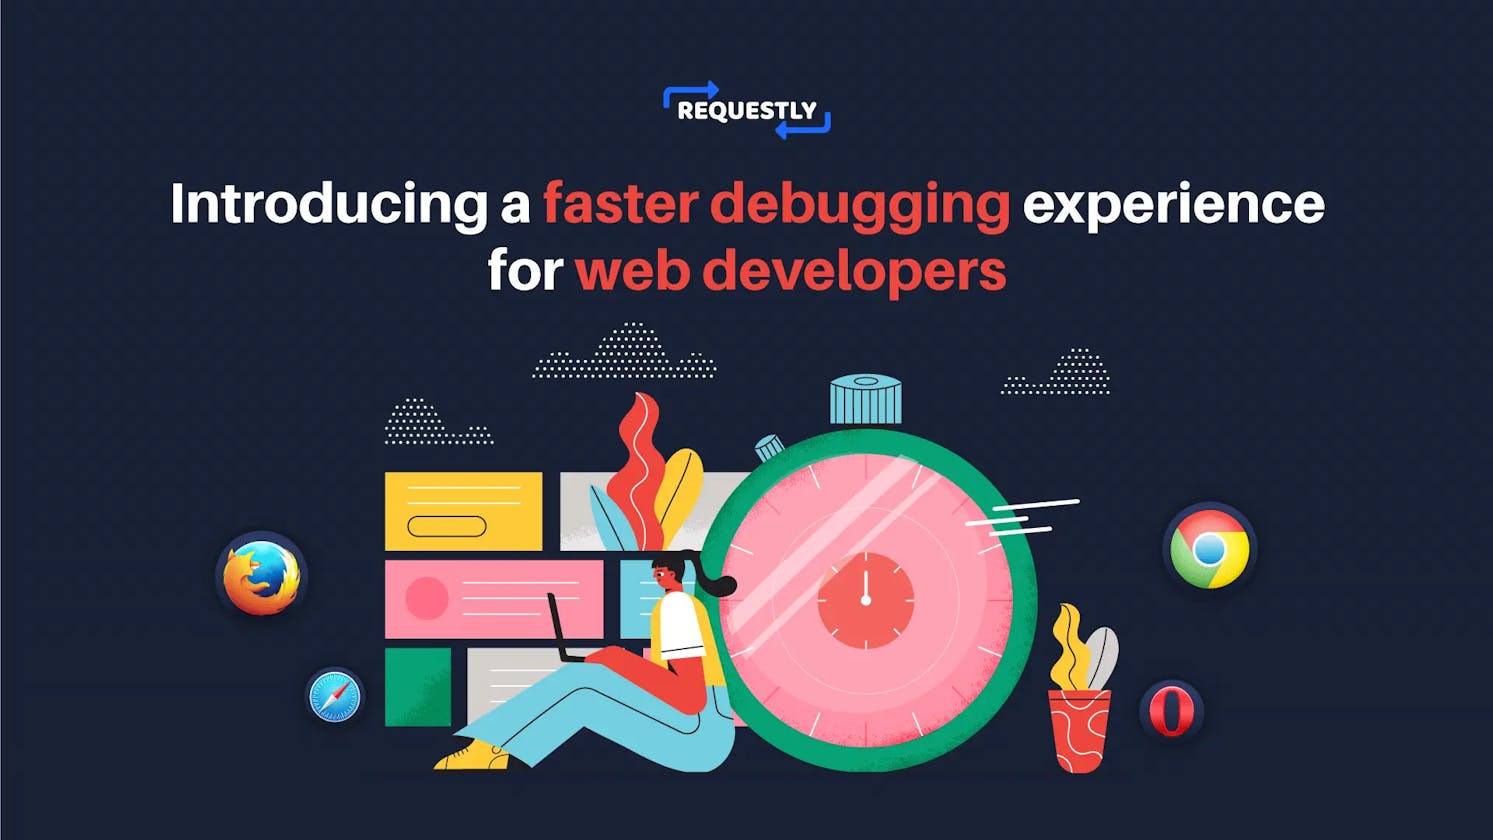 Introducing a faster debugging experience for web developers